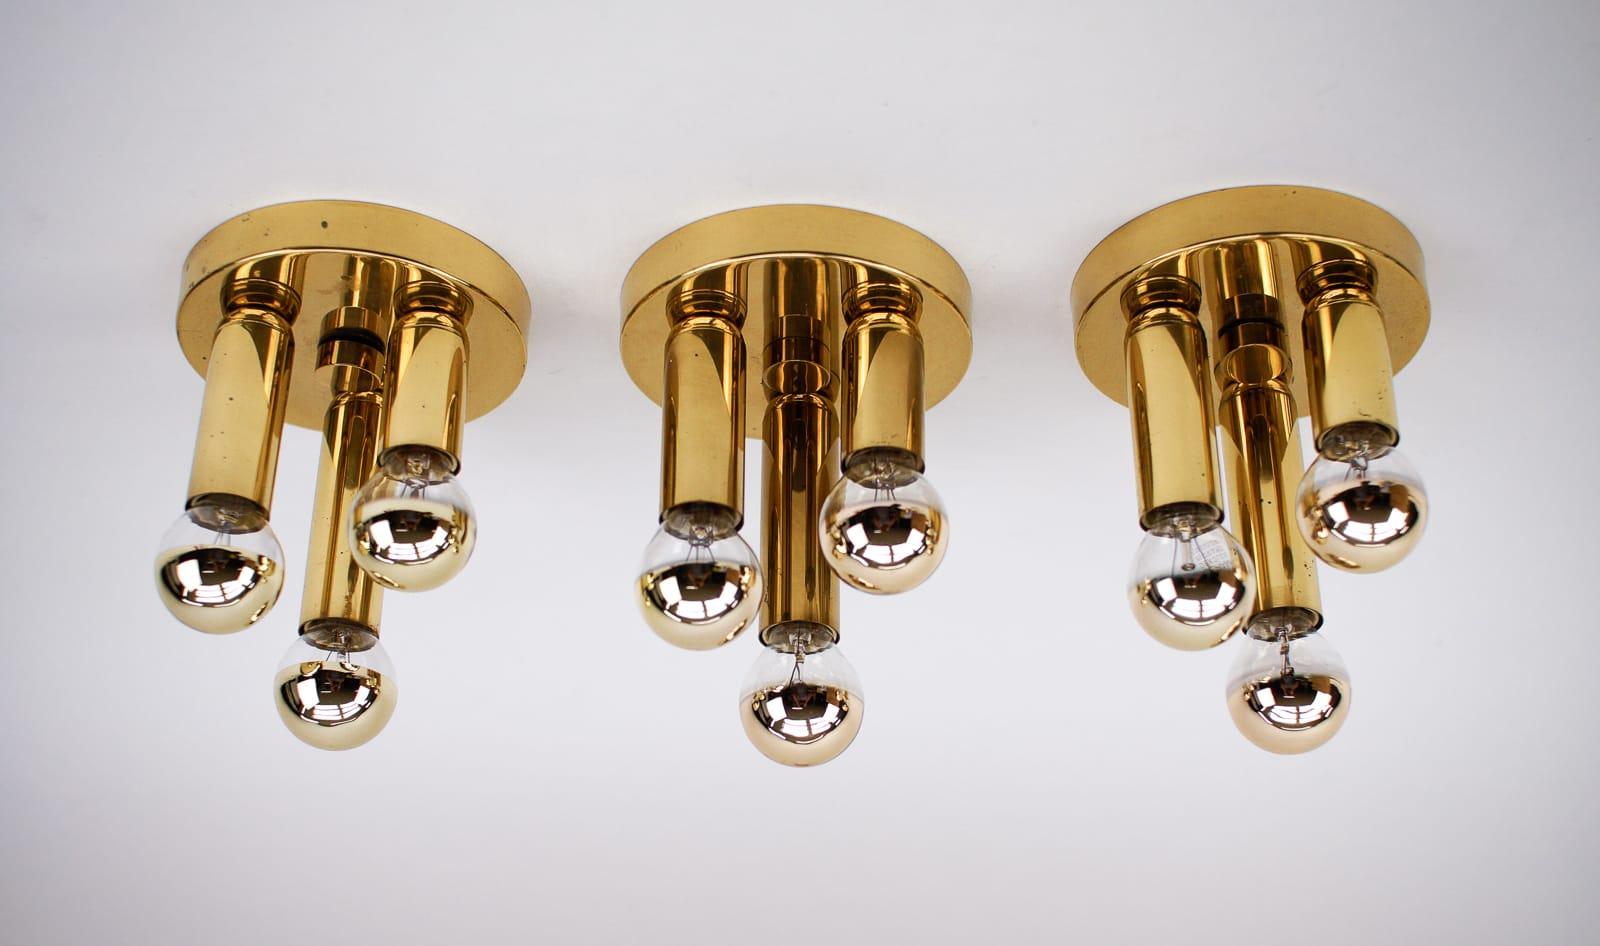 Set of three rare and beautiful Mid-Century Modern wall lamps. 

Fully functional.

Each with three E14 sockets. Works with 220V and 110V.

Wiring is suitable for all countries.

Very good original vintage condition. Wear consistent with use